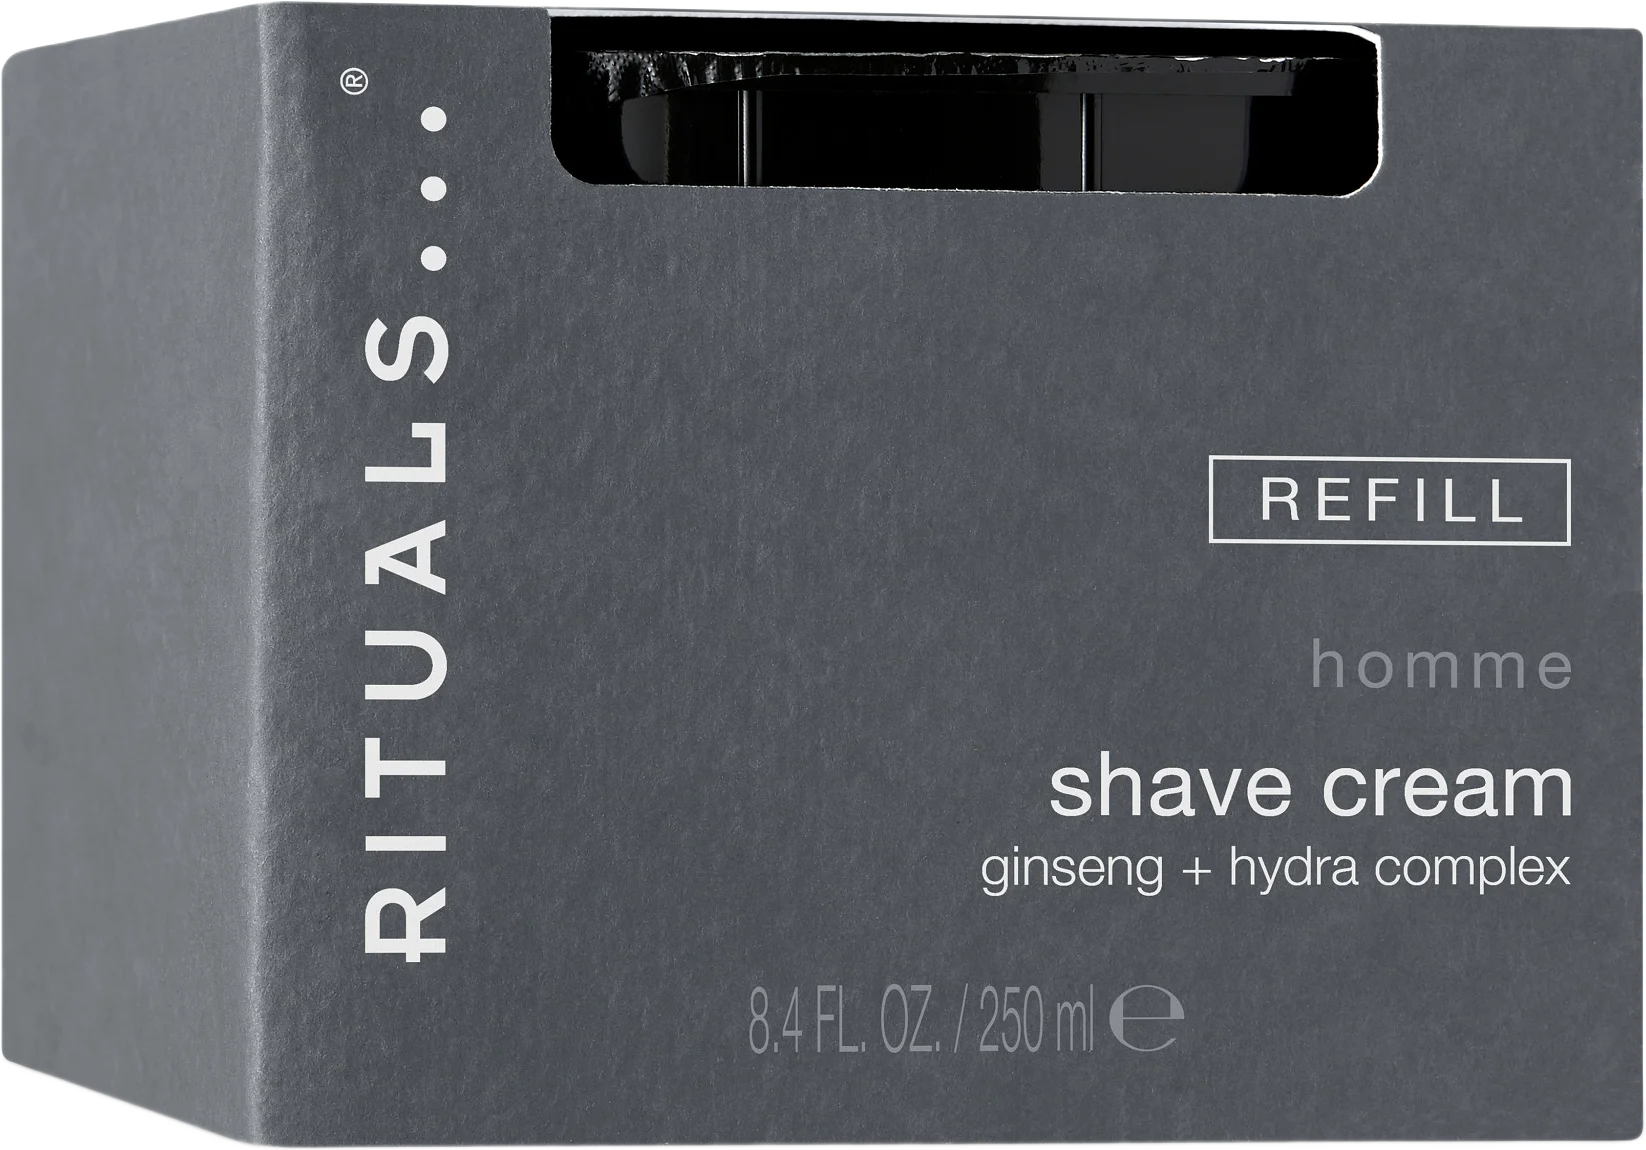 Homme Shave Cream Refill